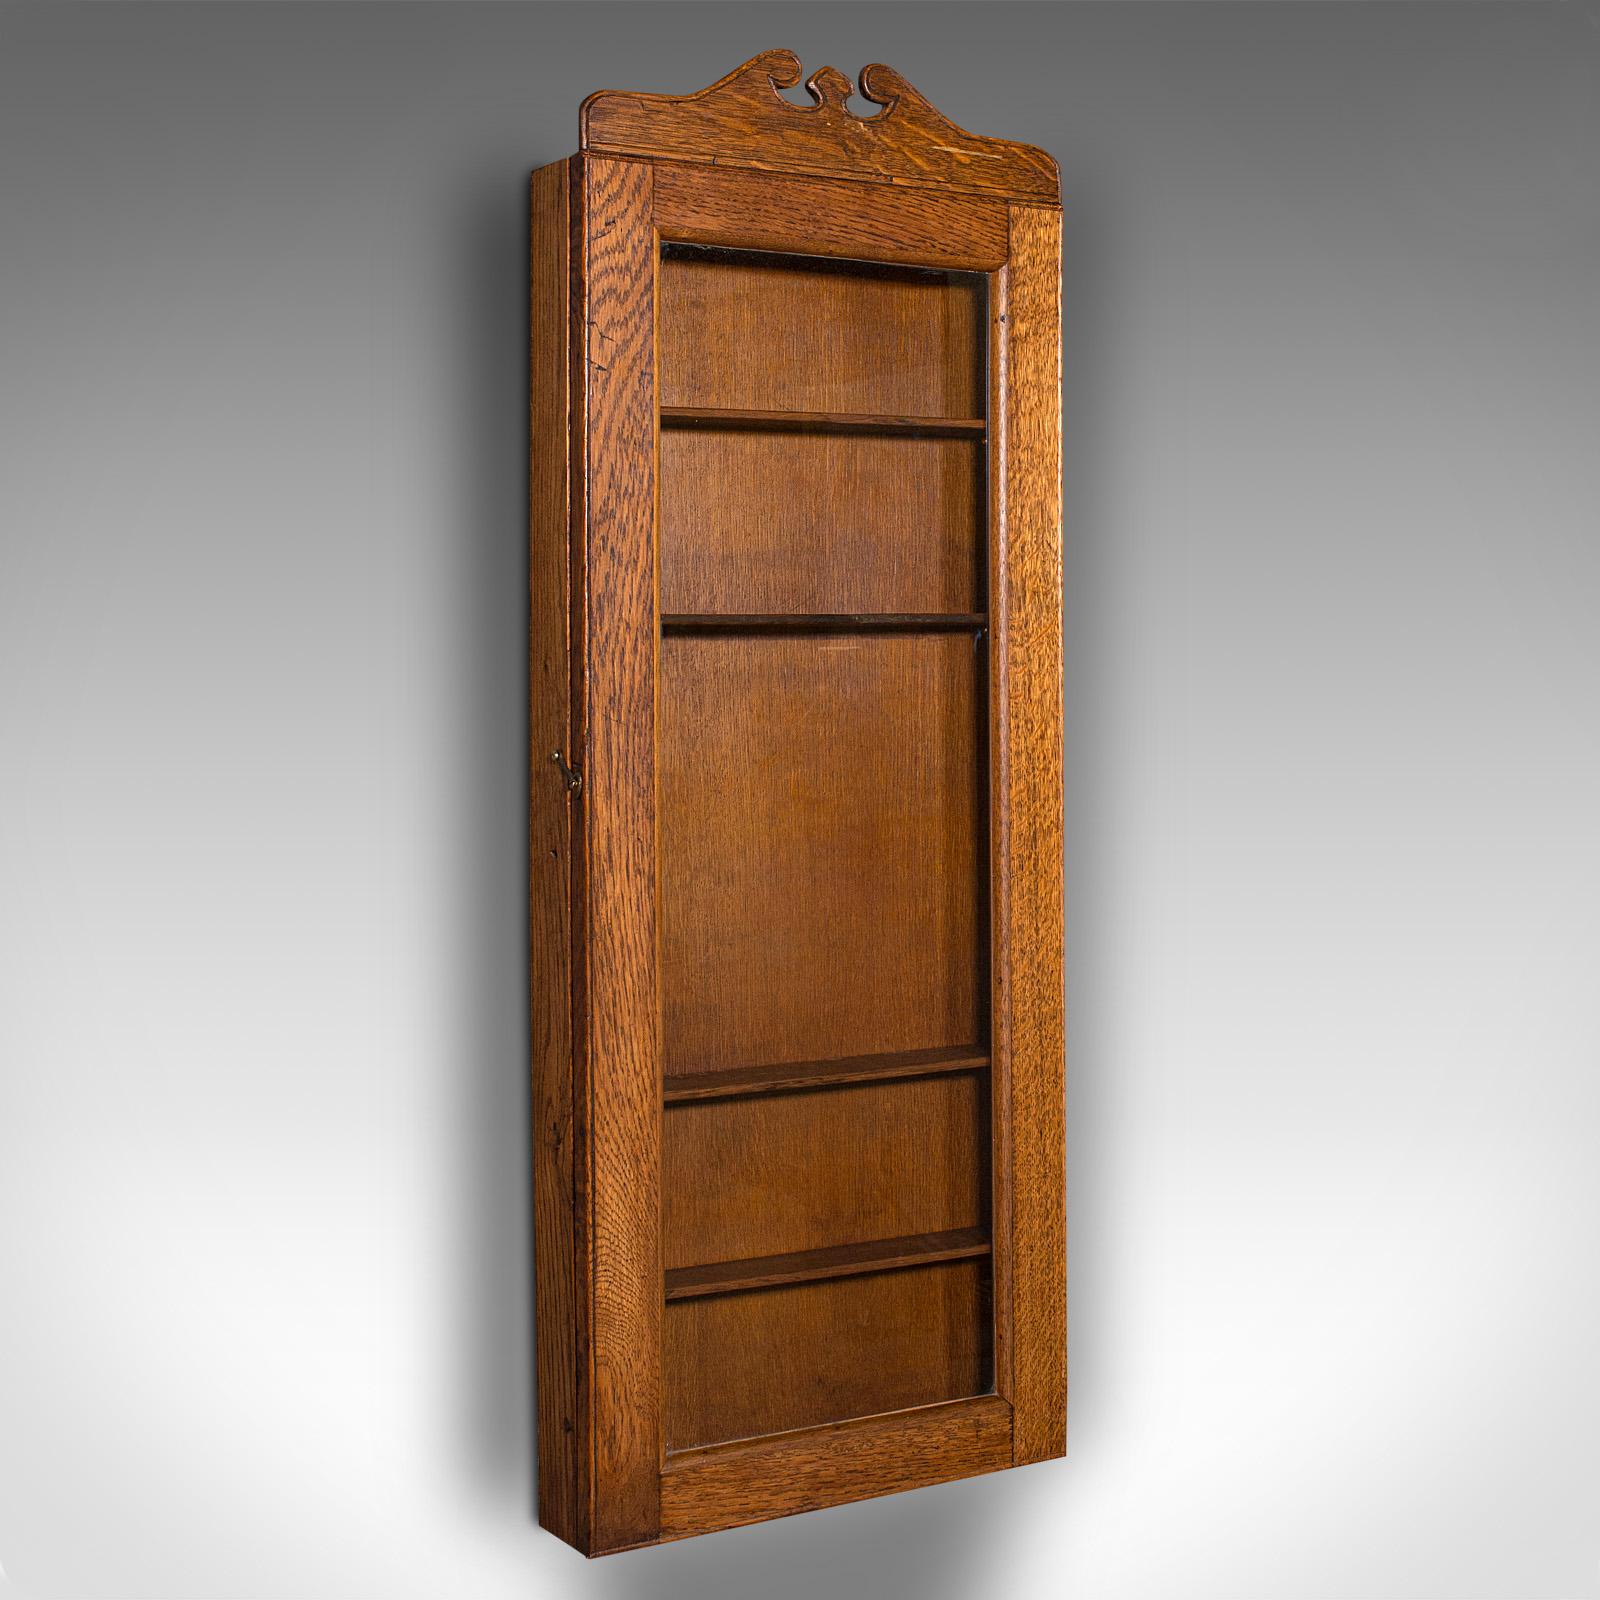 This is an antique shop's display cabinet. An English, oak showcase with glazed door, dating to the Edwardian period, circa 1910.

Slender proportion with a pleasingly tall profile, ideal for a small collection
Displays a desirable aged patina